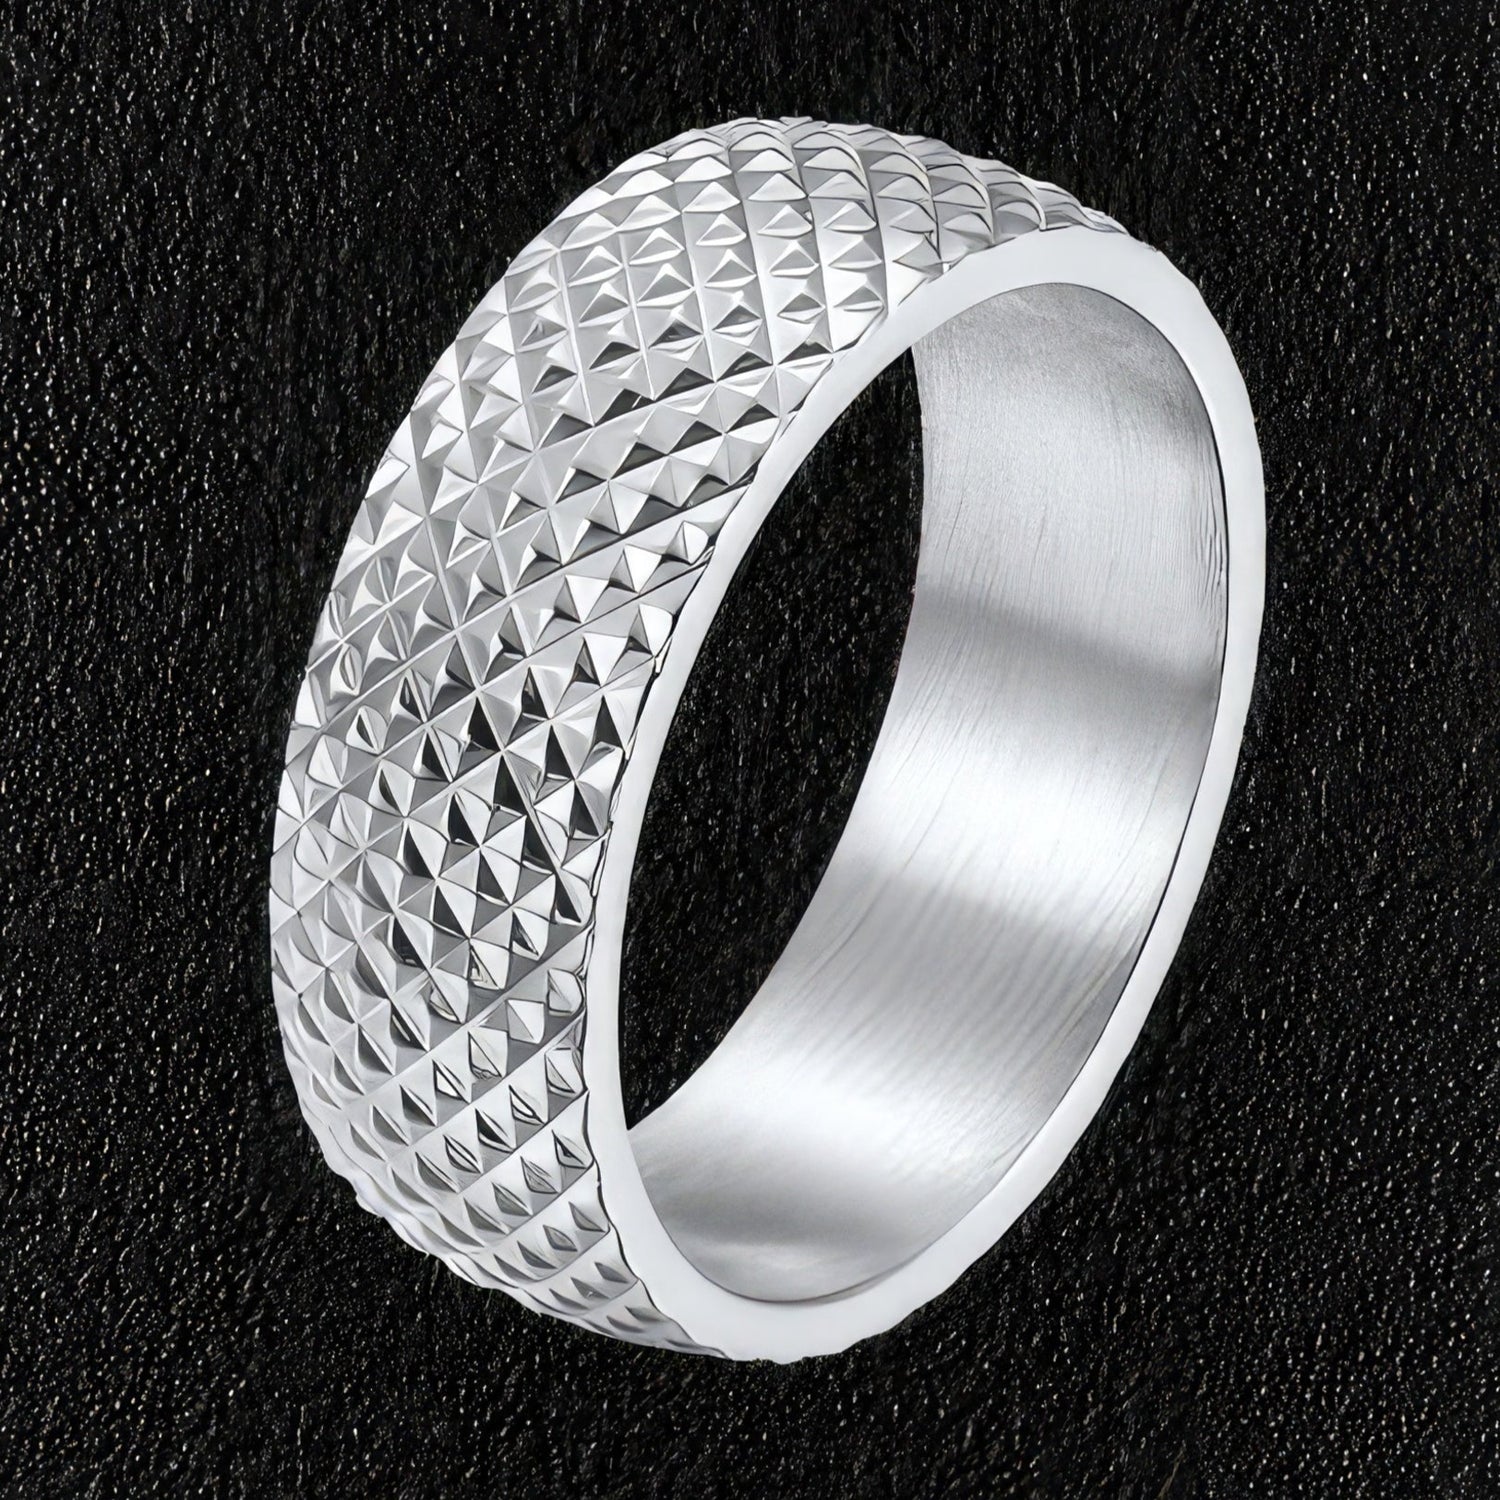 Stainless Steel Textured Surface Ring